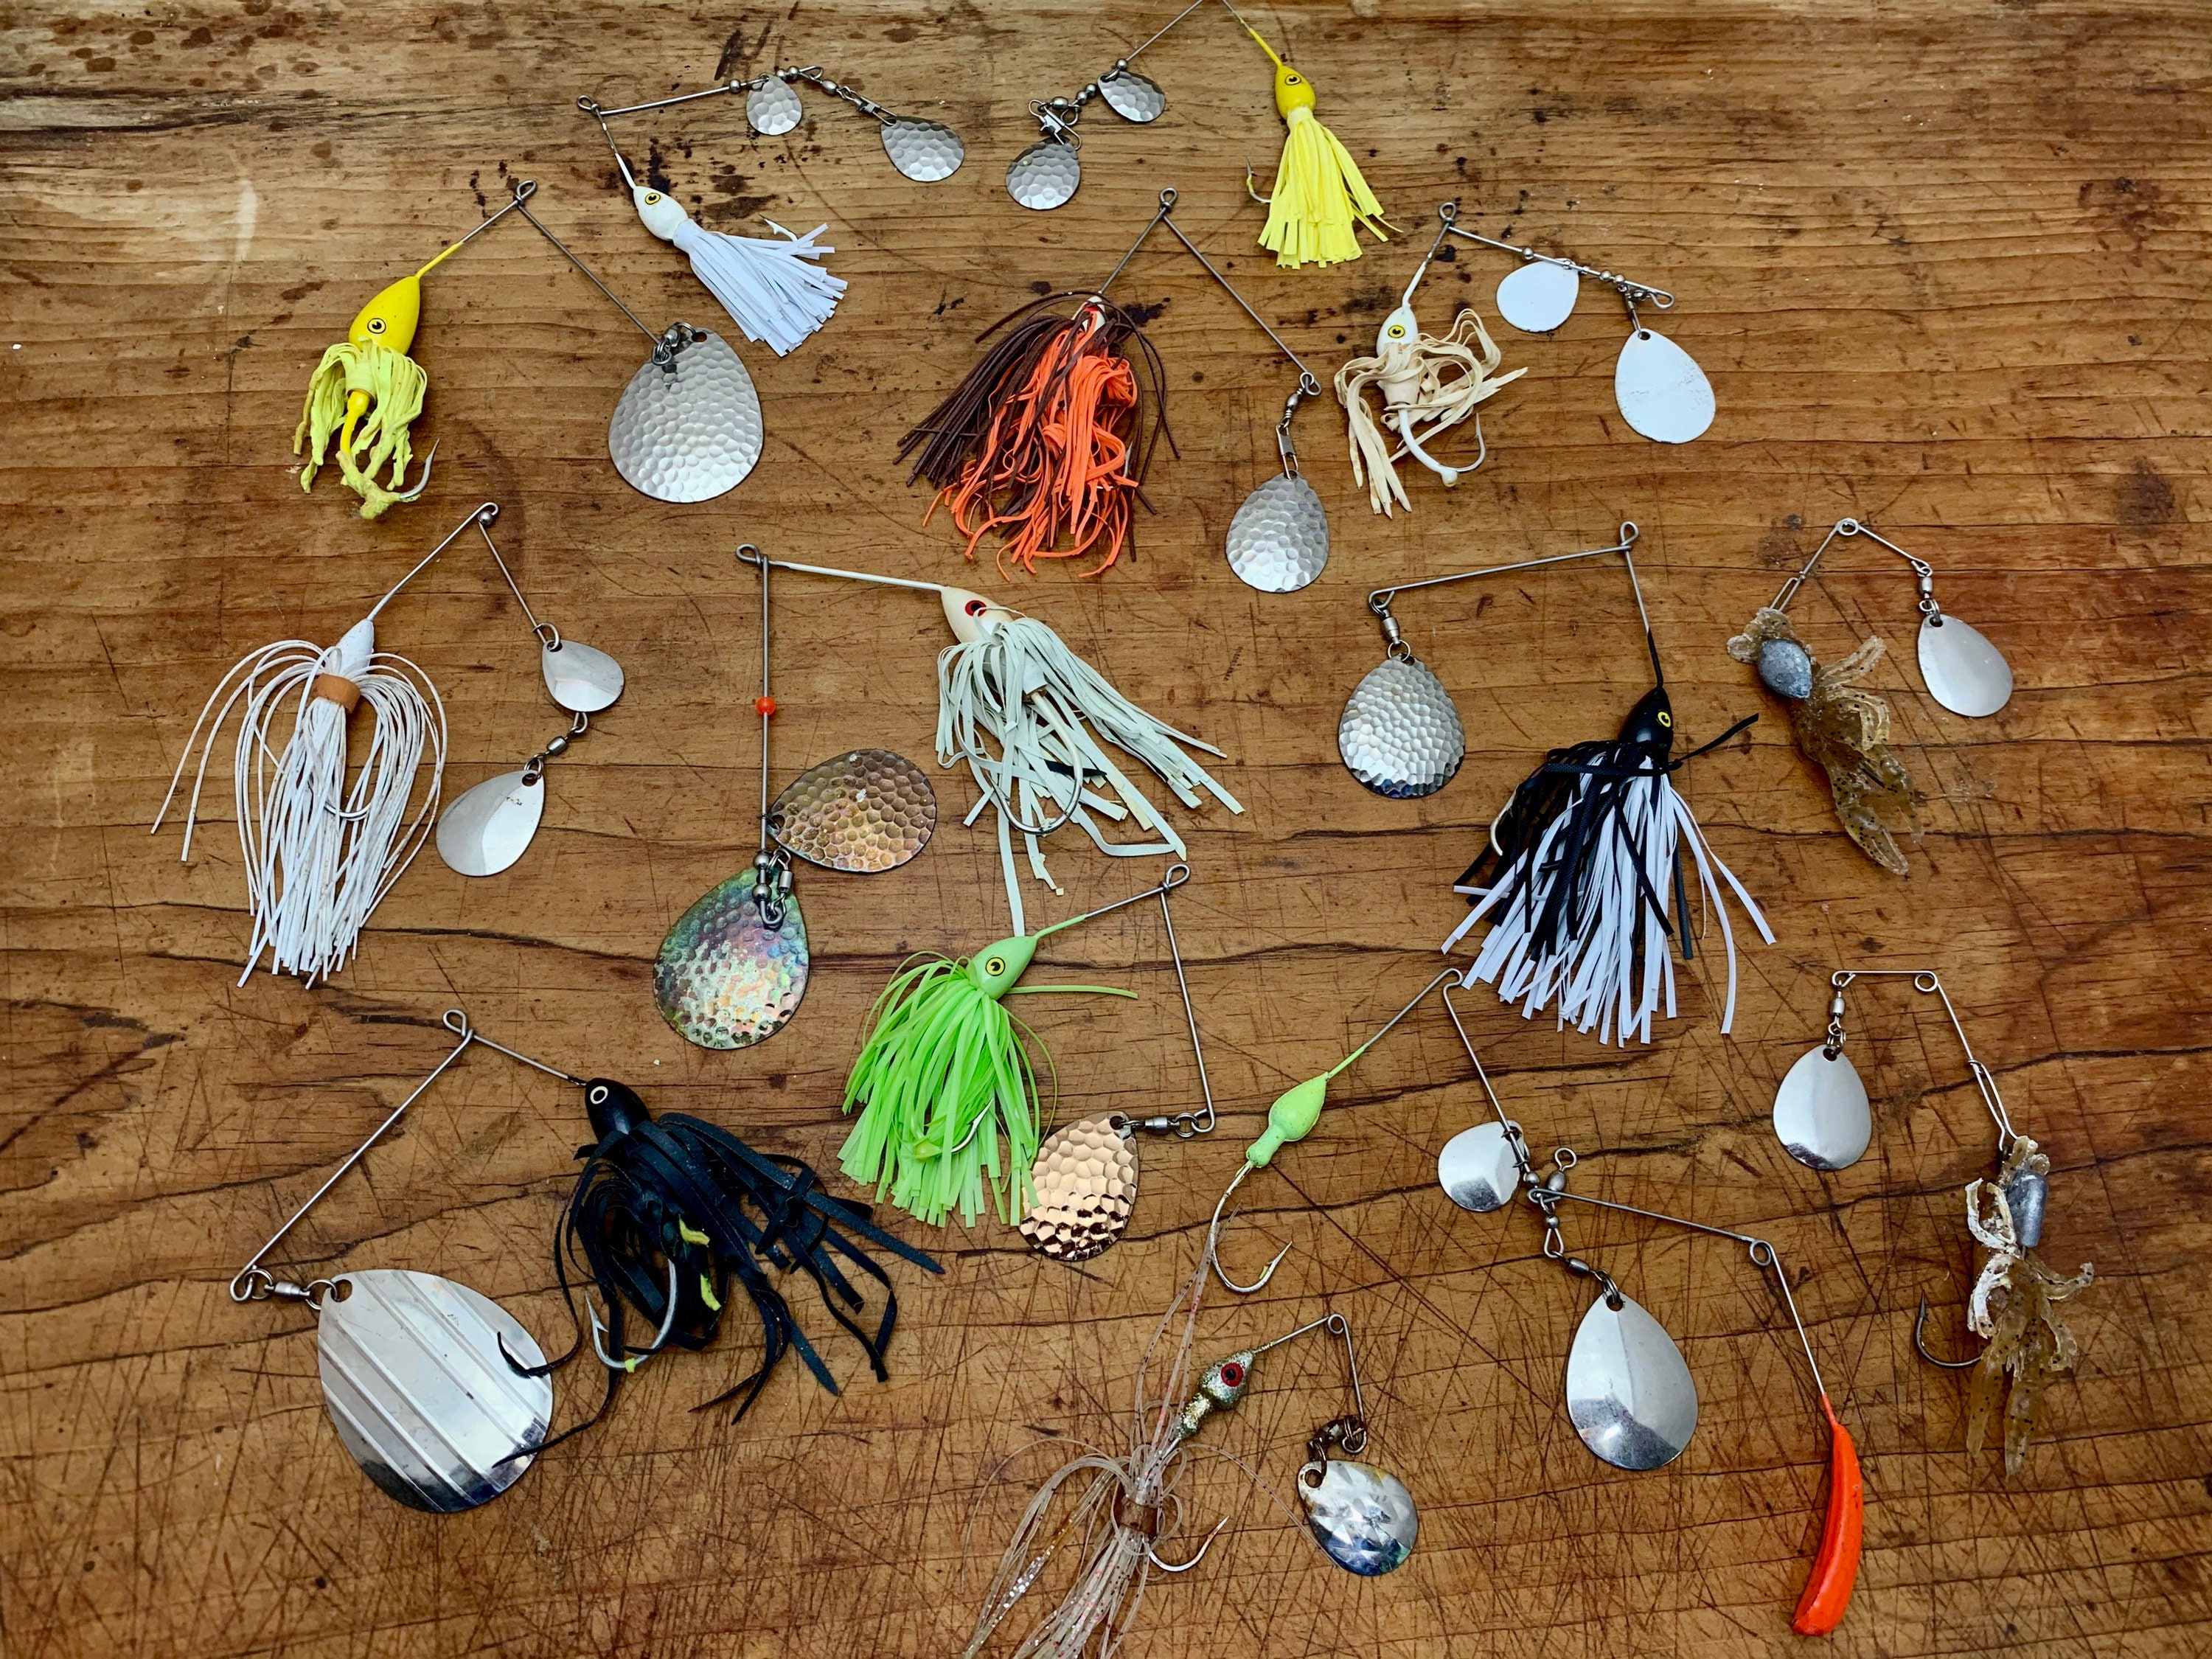 Vintage Spinnerbait Fishing Lures, Lot of 15 With Hooks, Skirts